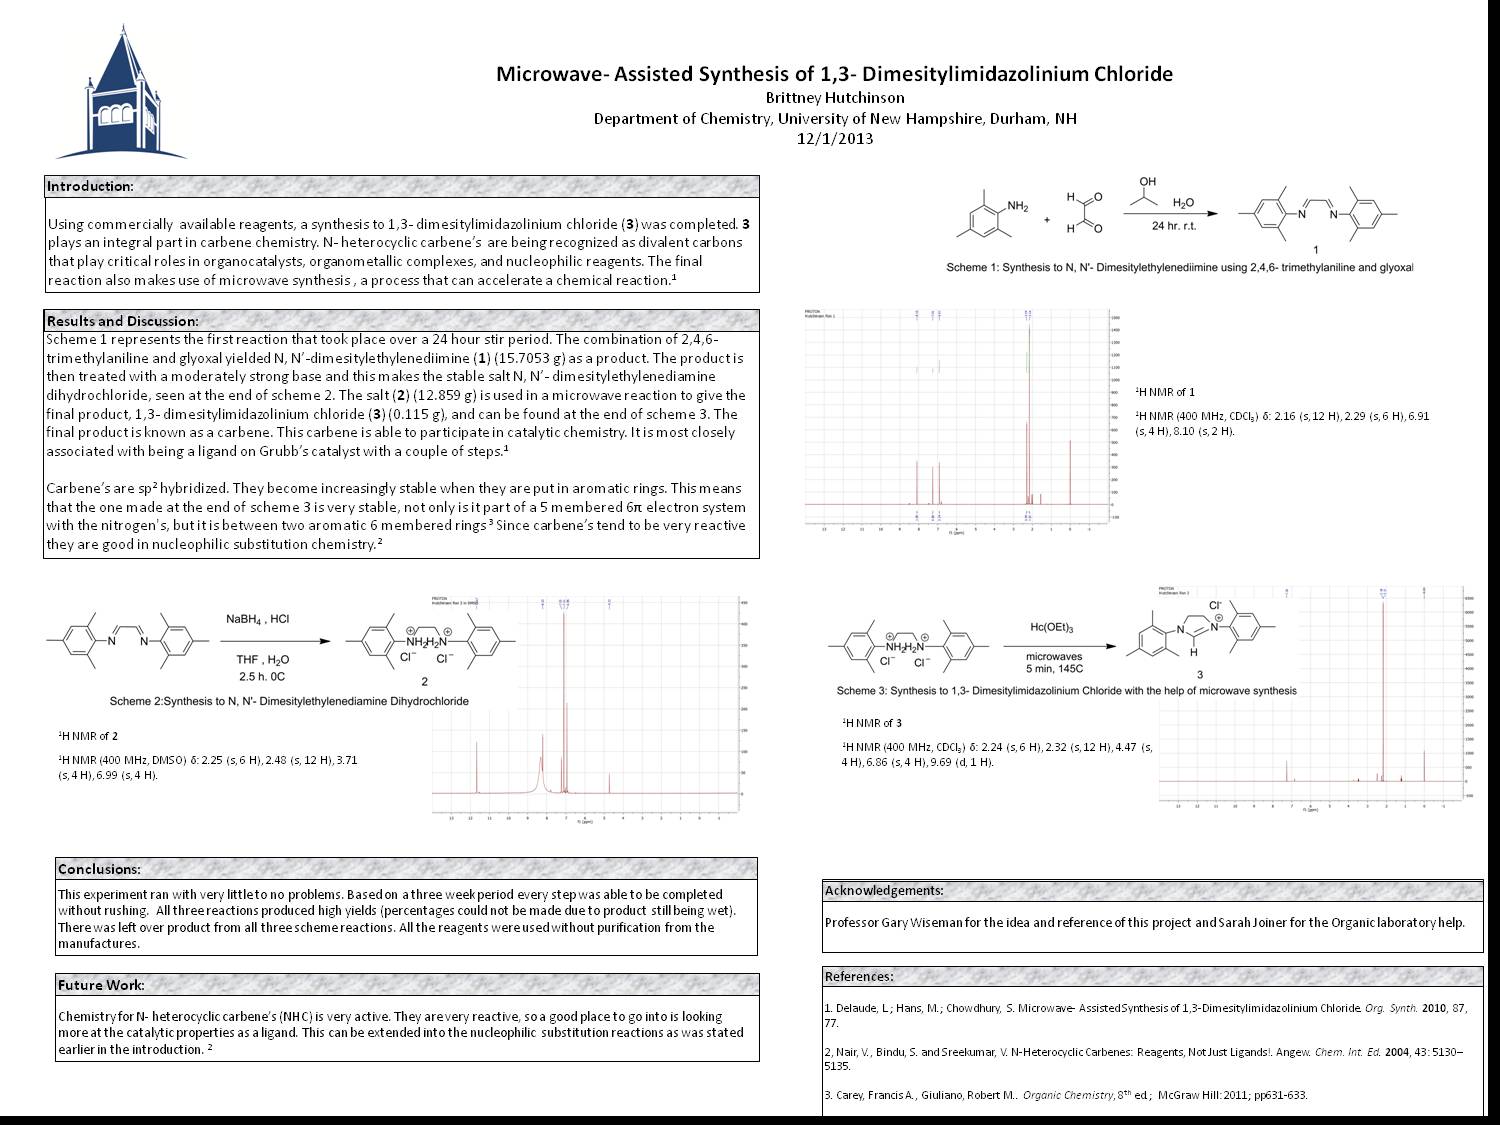 Microwave- Assisted Synthesis Of 1,3- Dimesitylimidazolinium Chloride  by brittney1718